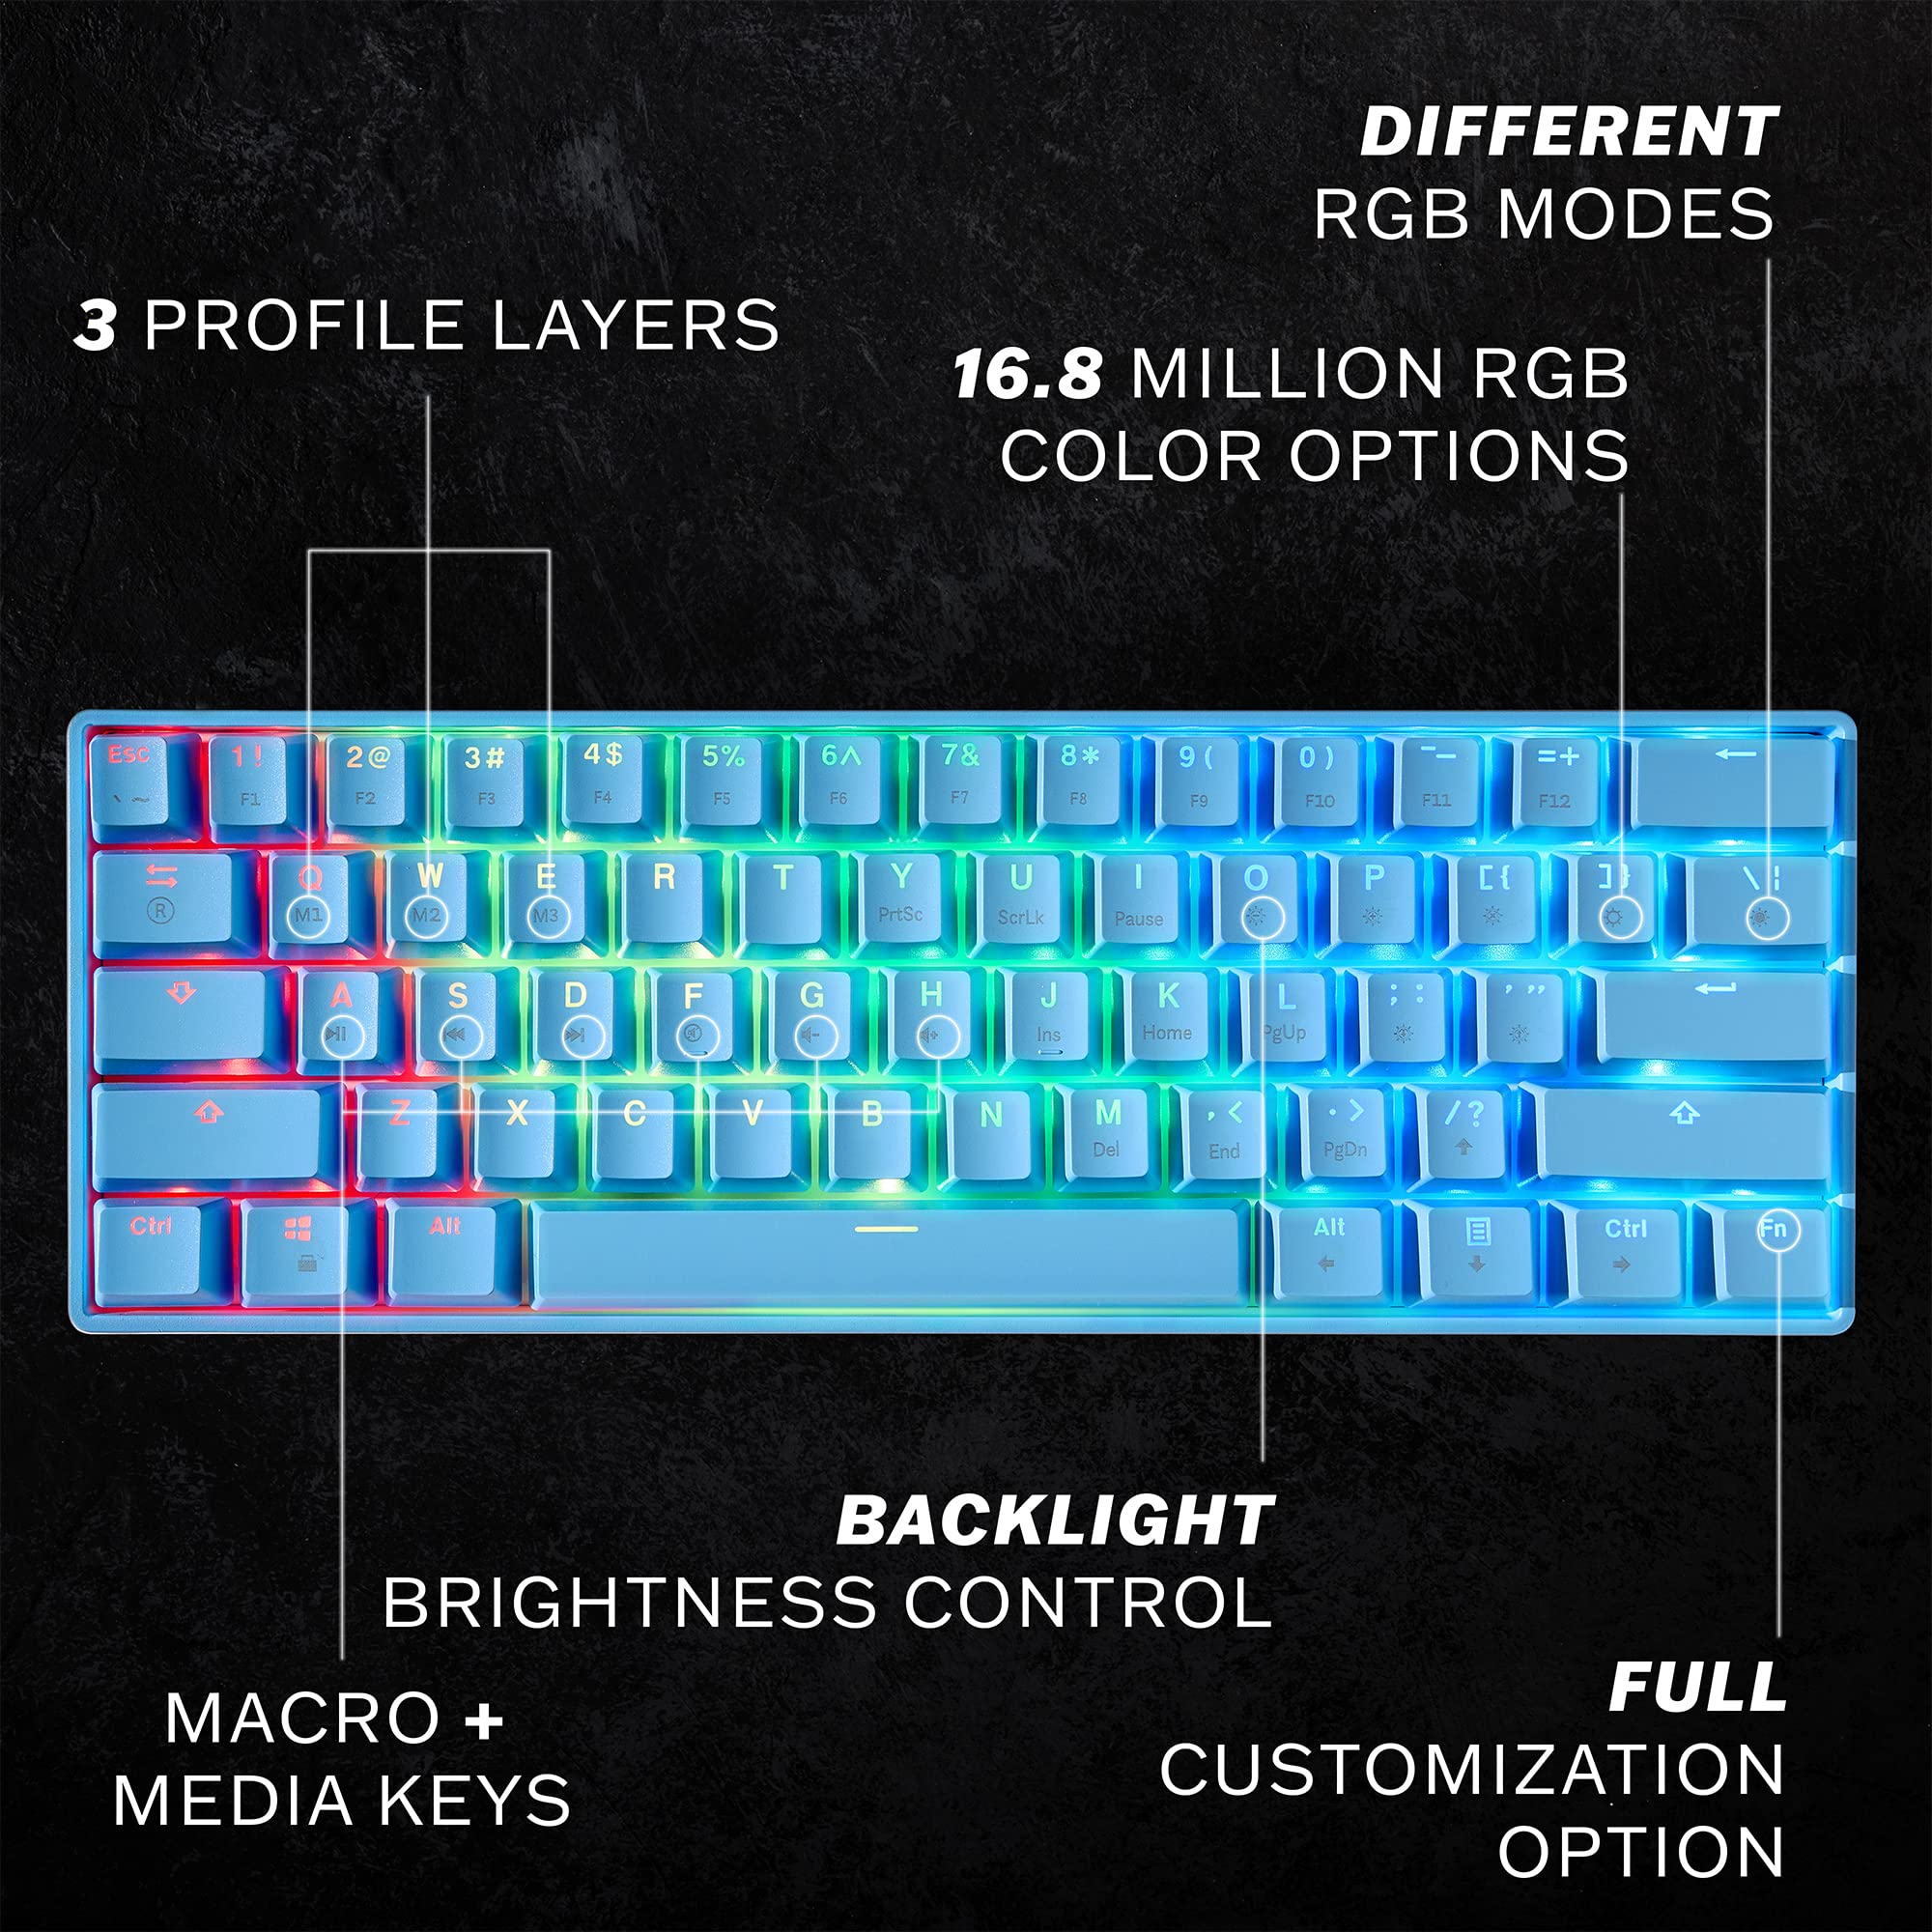 HK GAMING GK61 Mechanical Gaming Keyboard - 61 Keys Multi Color RGB Illuminated LED Backlit Wired Programmable for PC/Mac Gamer (Gateron Optical Red, Blue)